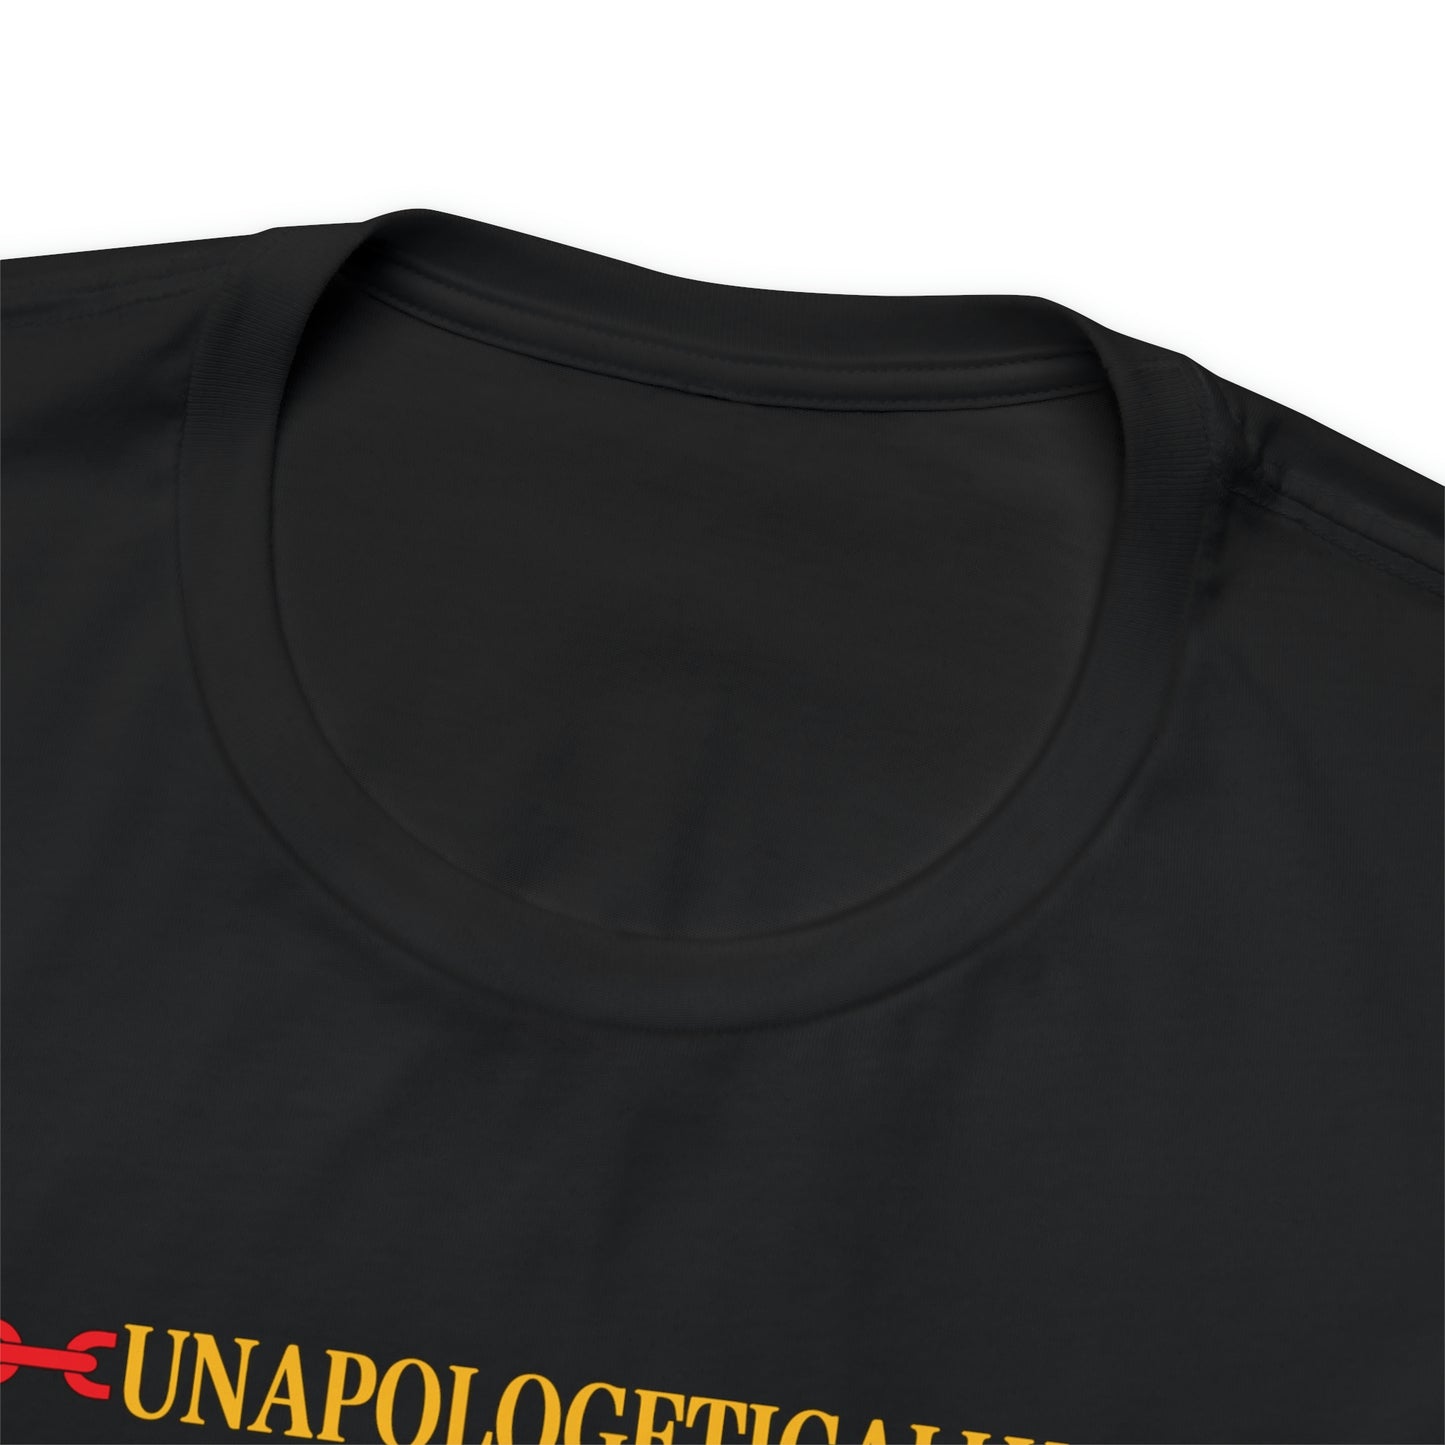 Unapologetically Black Juneteenth Unisex Tee -  FREE SHIPPING